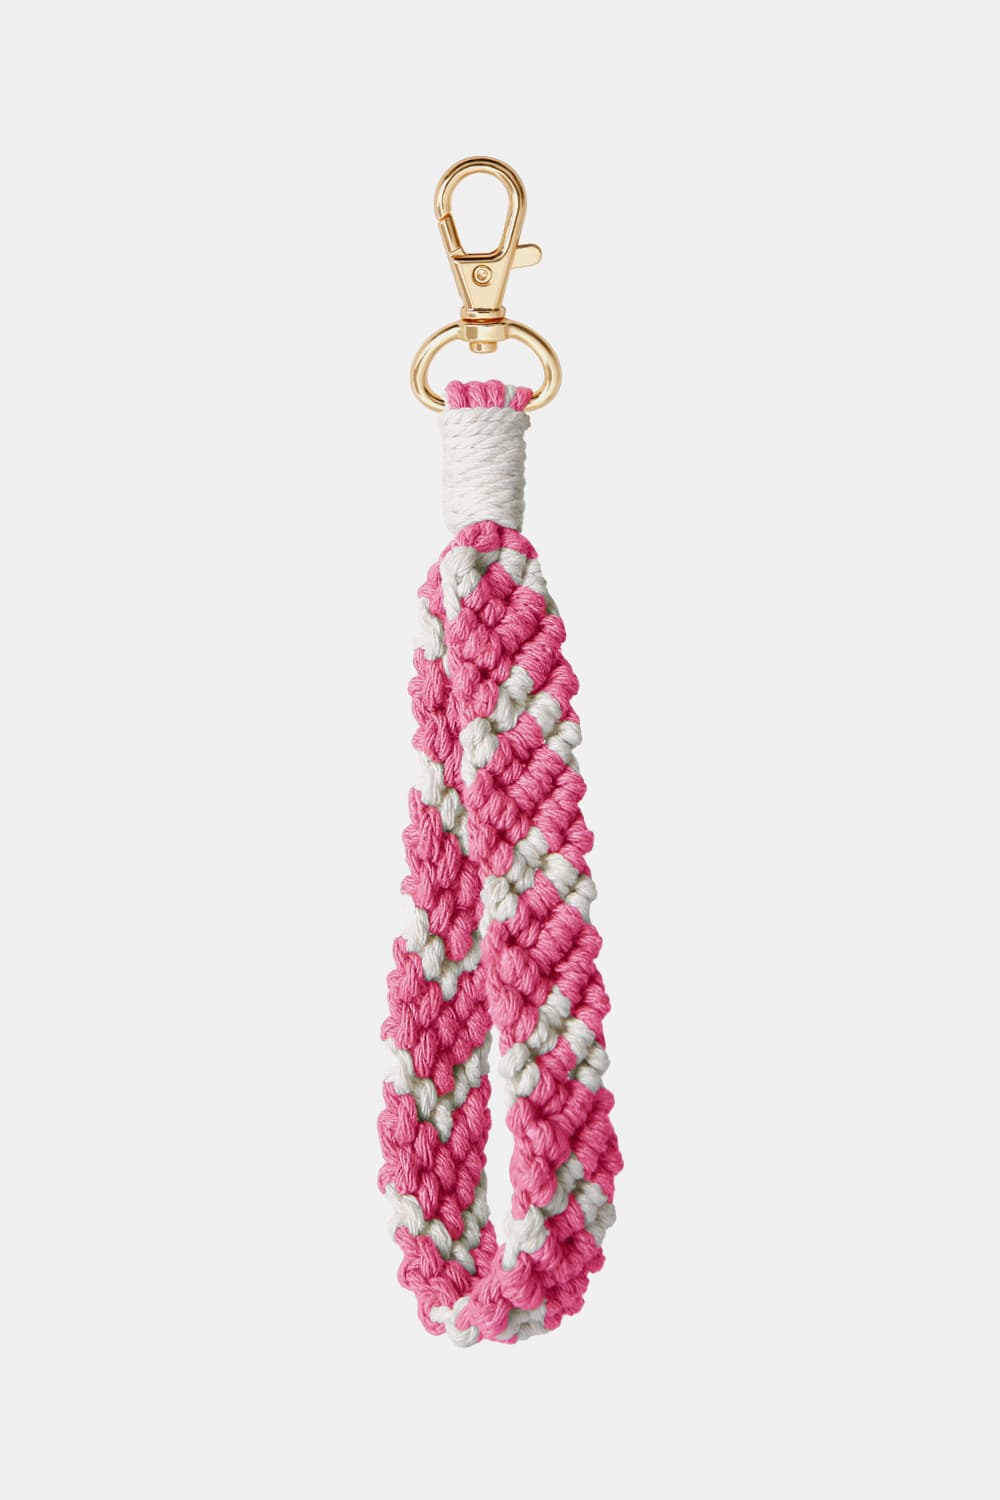 Trendsi Cupid Beauty Supplies Hot Pink / One Size Keychains Macrame Wristlet Key Chain